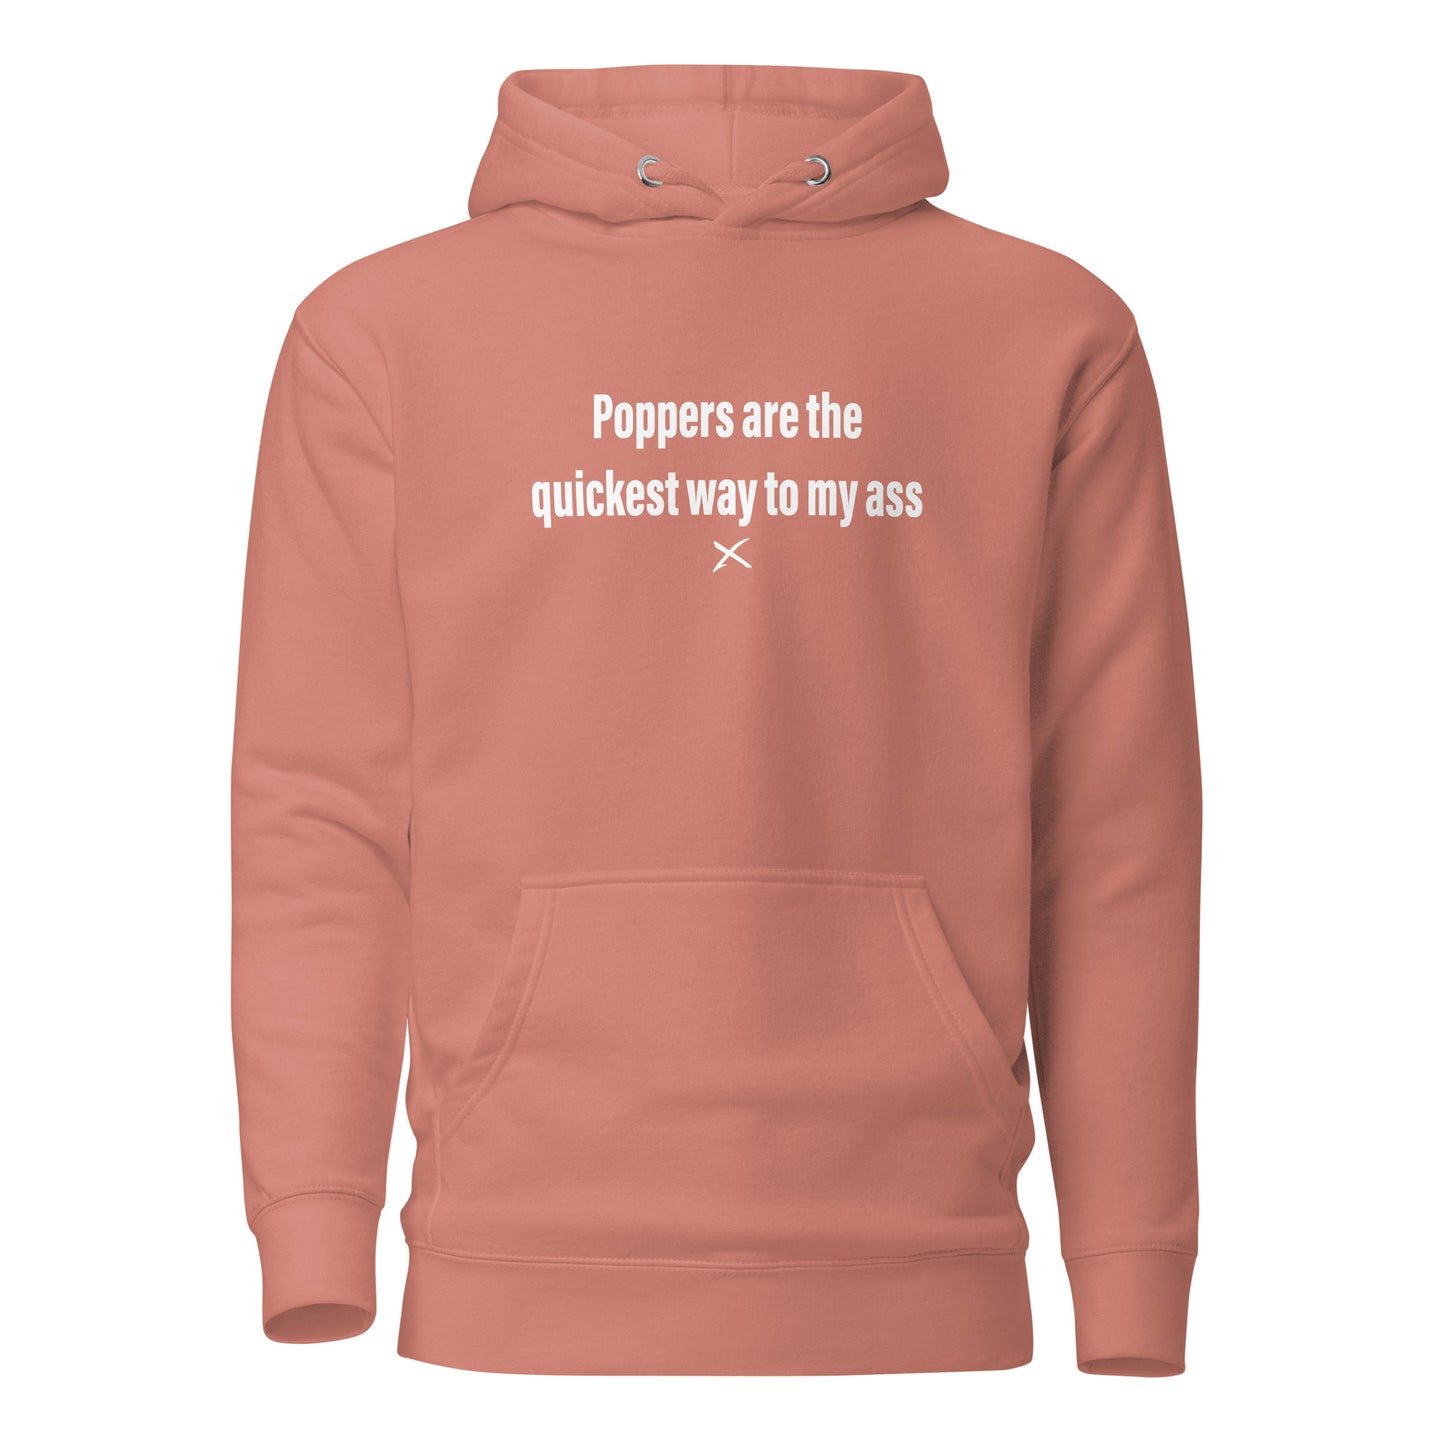 Poppers are the quickest way to my ass - Hoodie